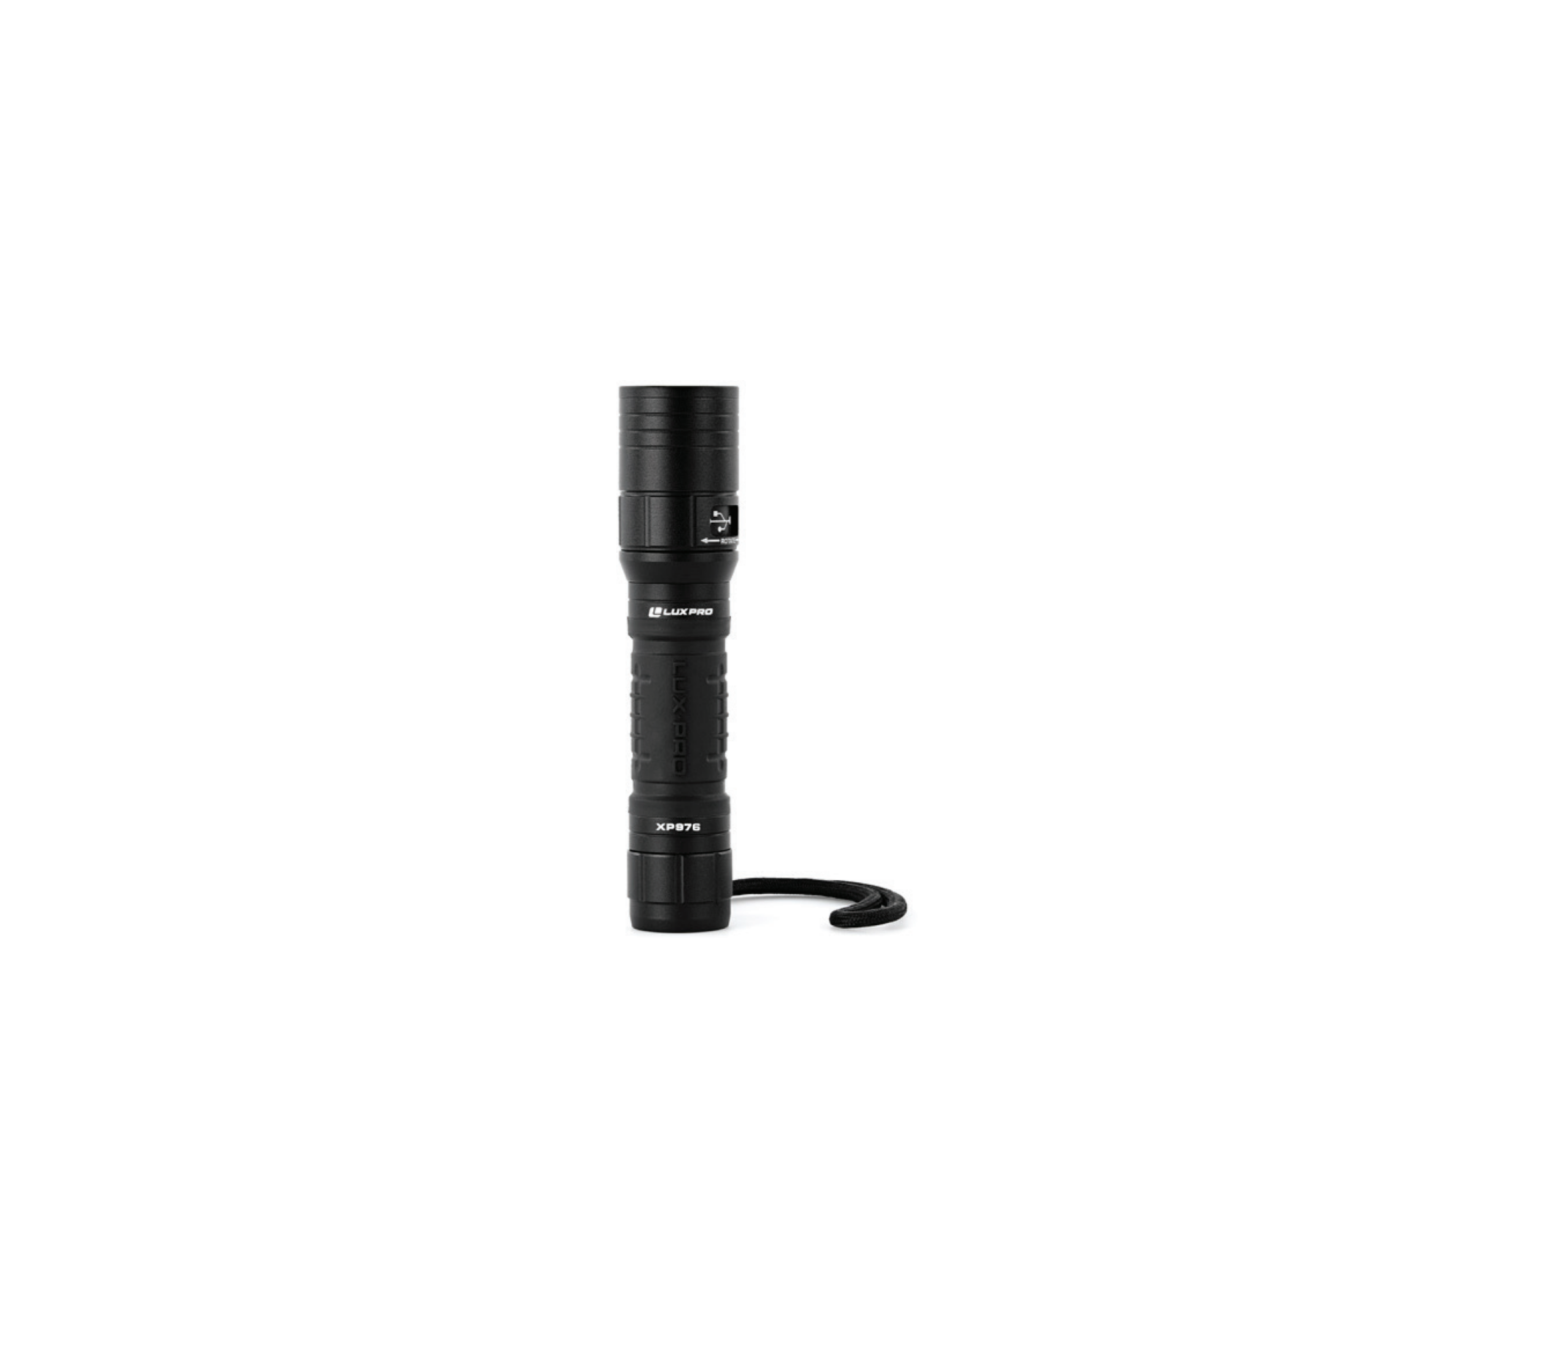 LUXPRO XP976 Rechargeable Utility LED Flashlight User Manual